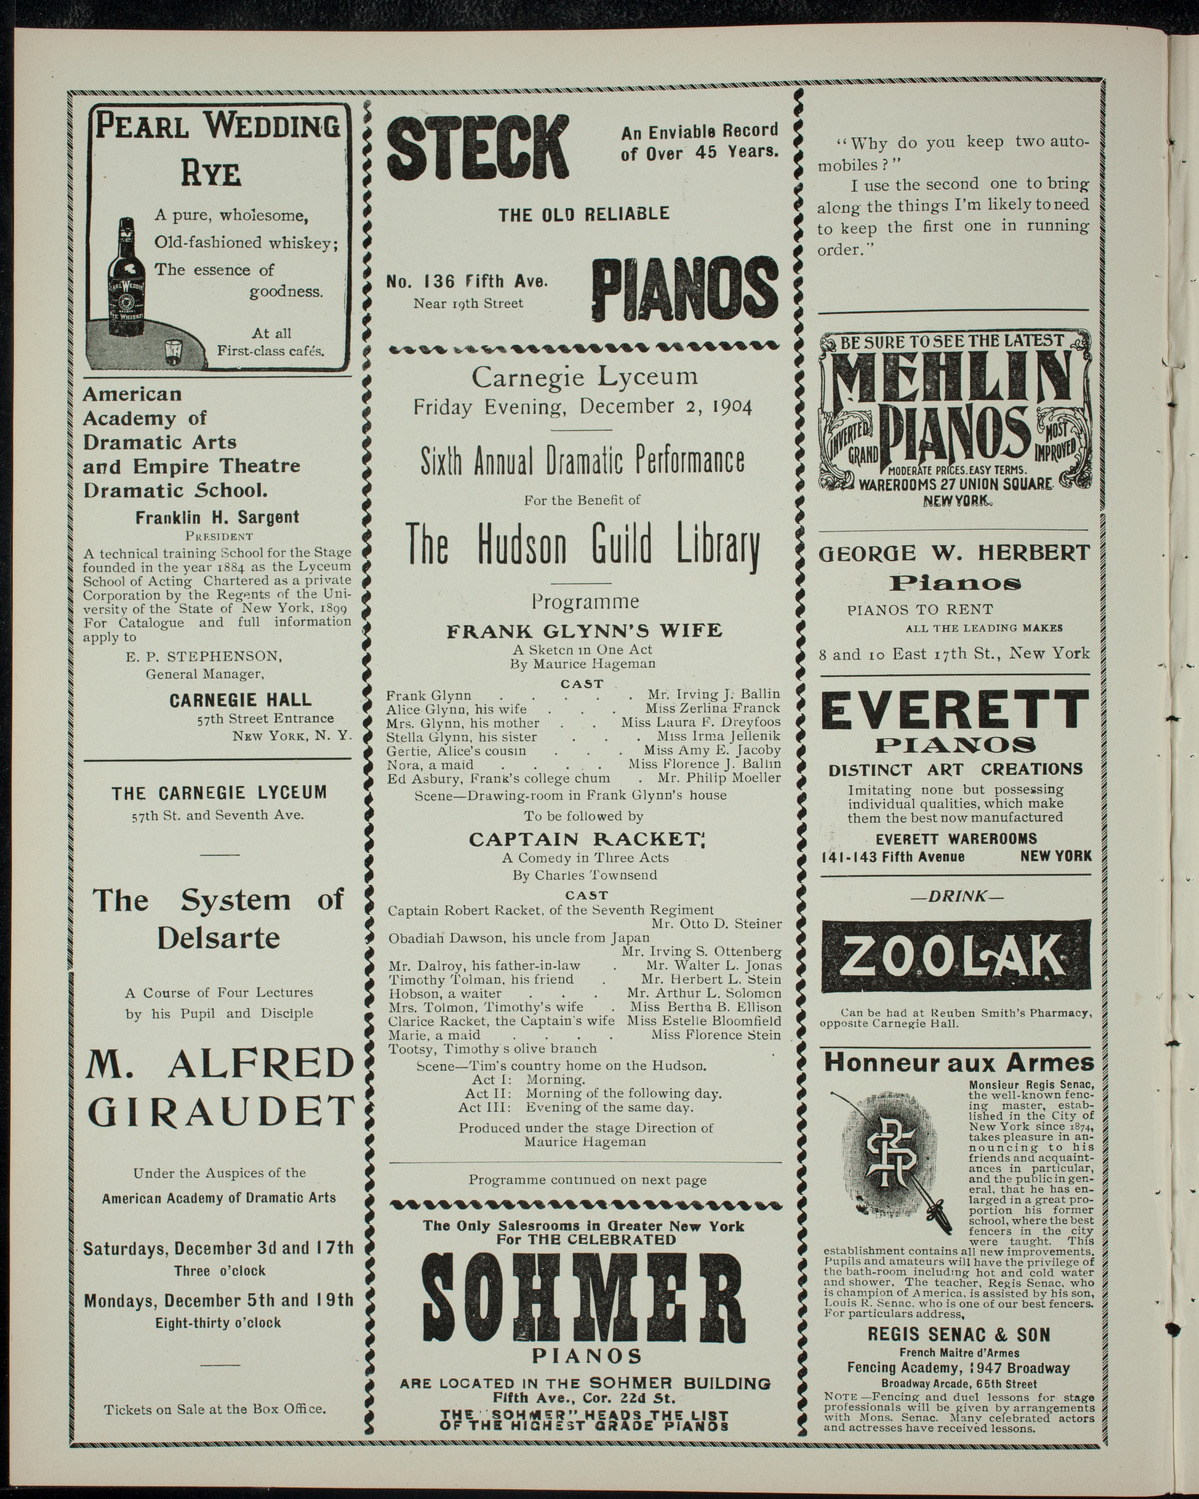 Sixth Annual Dramatic Performance For the Benefit of The Hudson Guild Library, December 2, 1904, program page 2